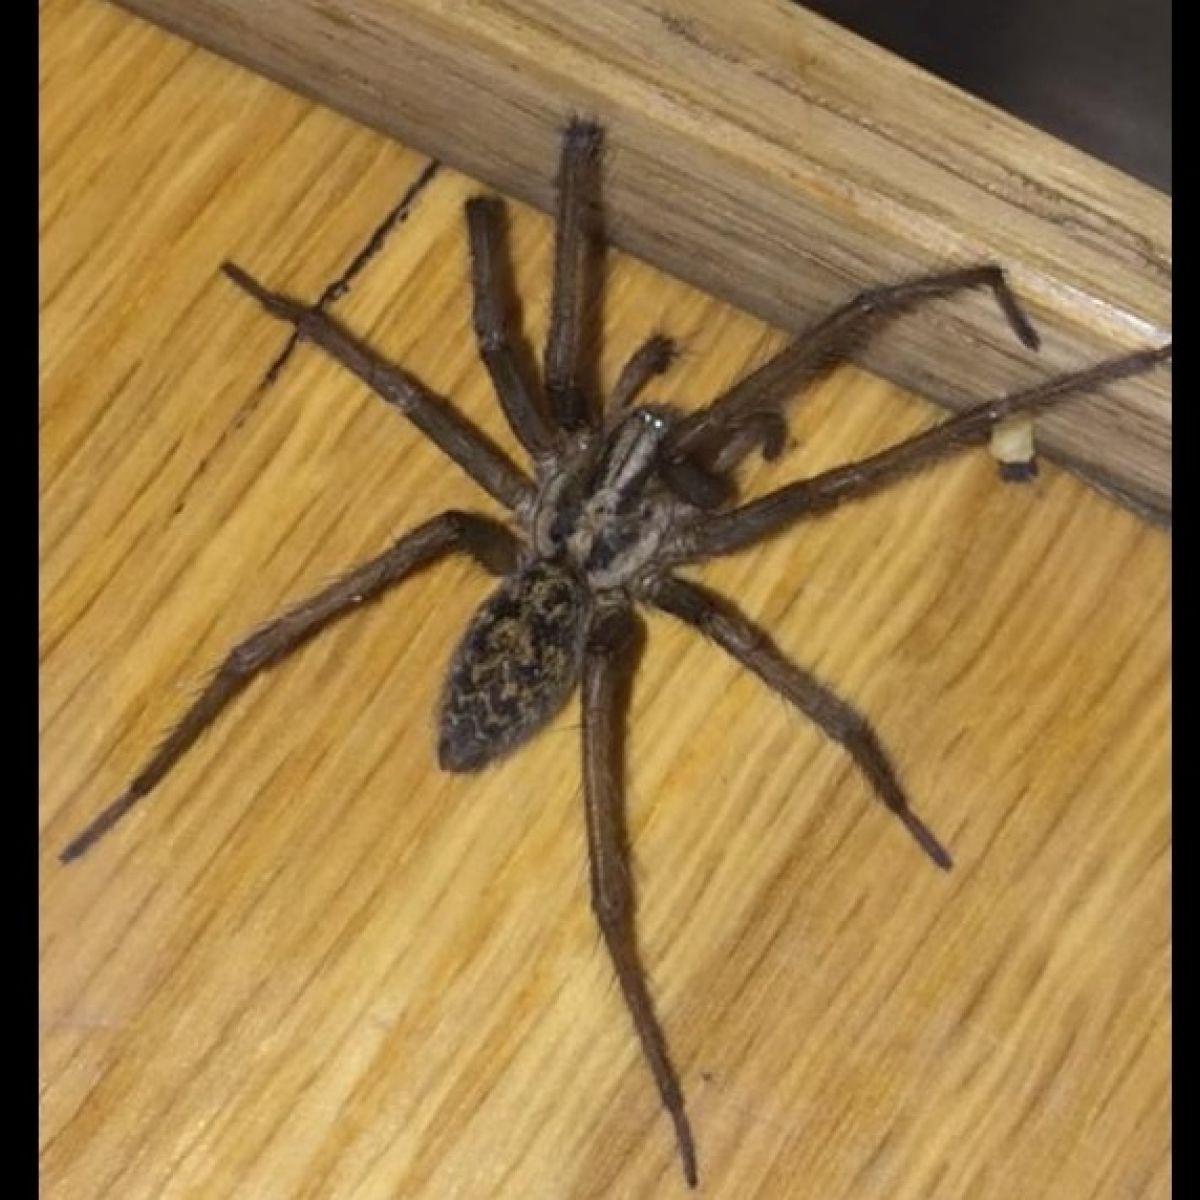 Big Spider Found In Wexford More Common Than You Think